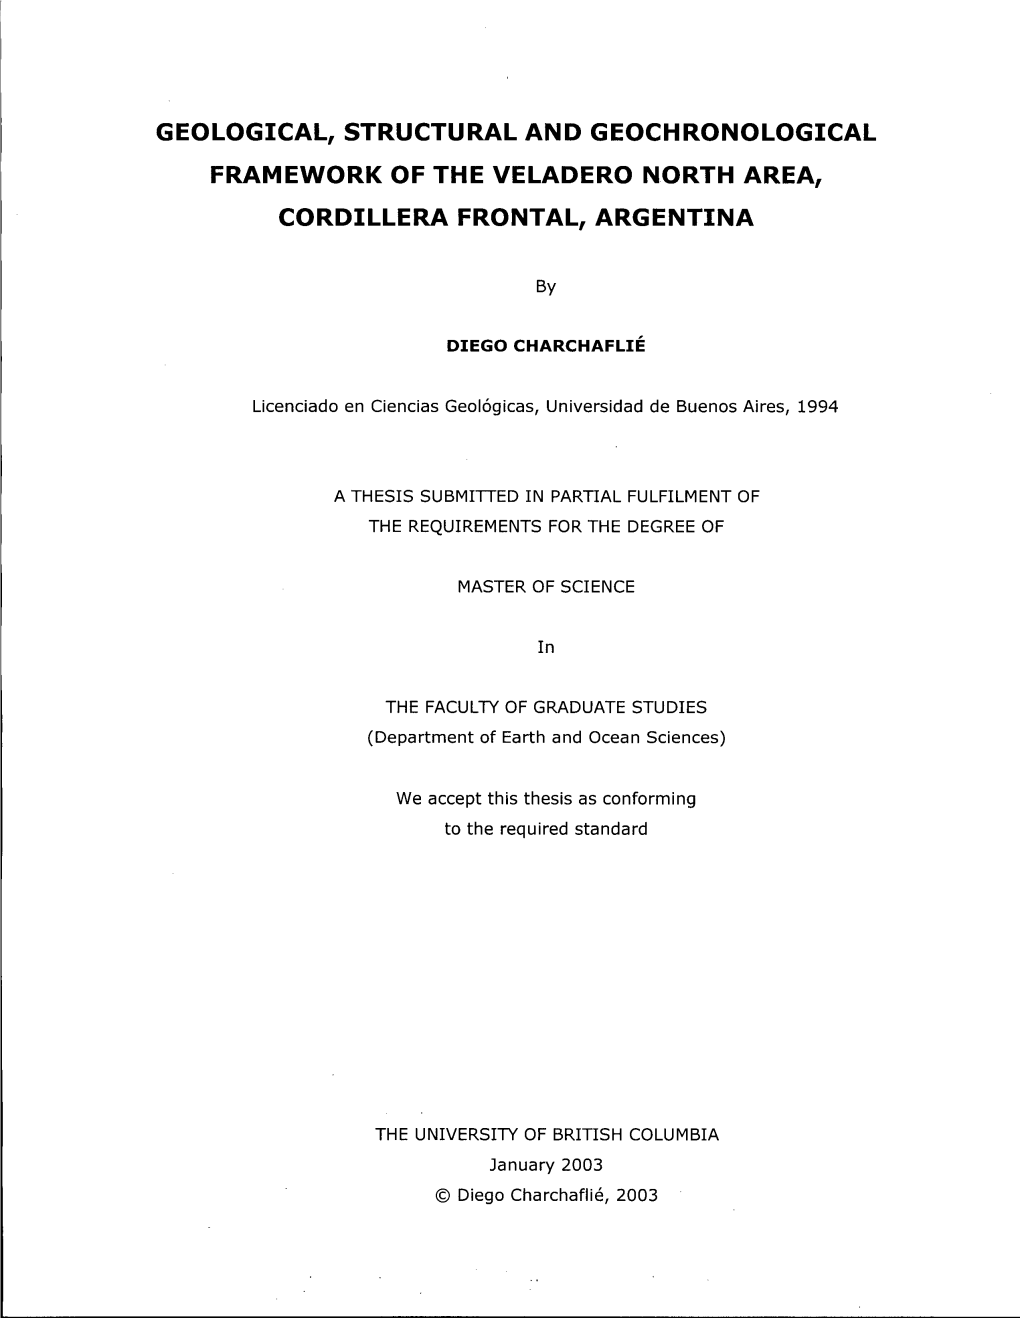 Geological, Structural and Geochronological Framework of the Veladero North Area, Cordillera Frontal, Argentina